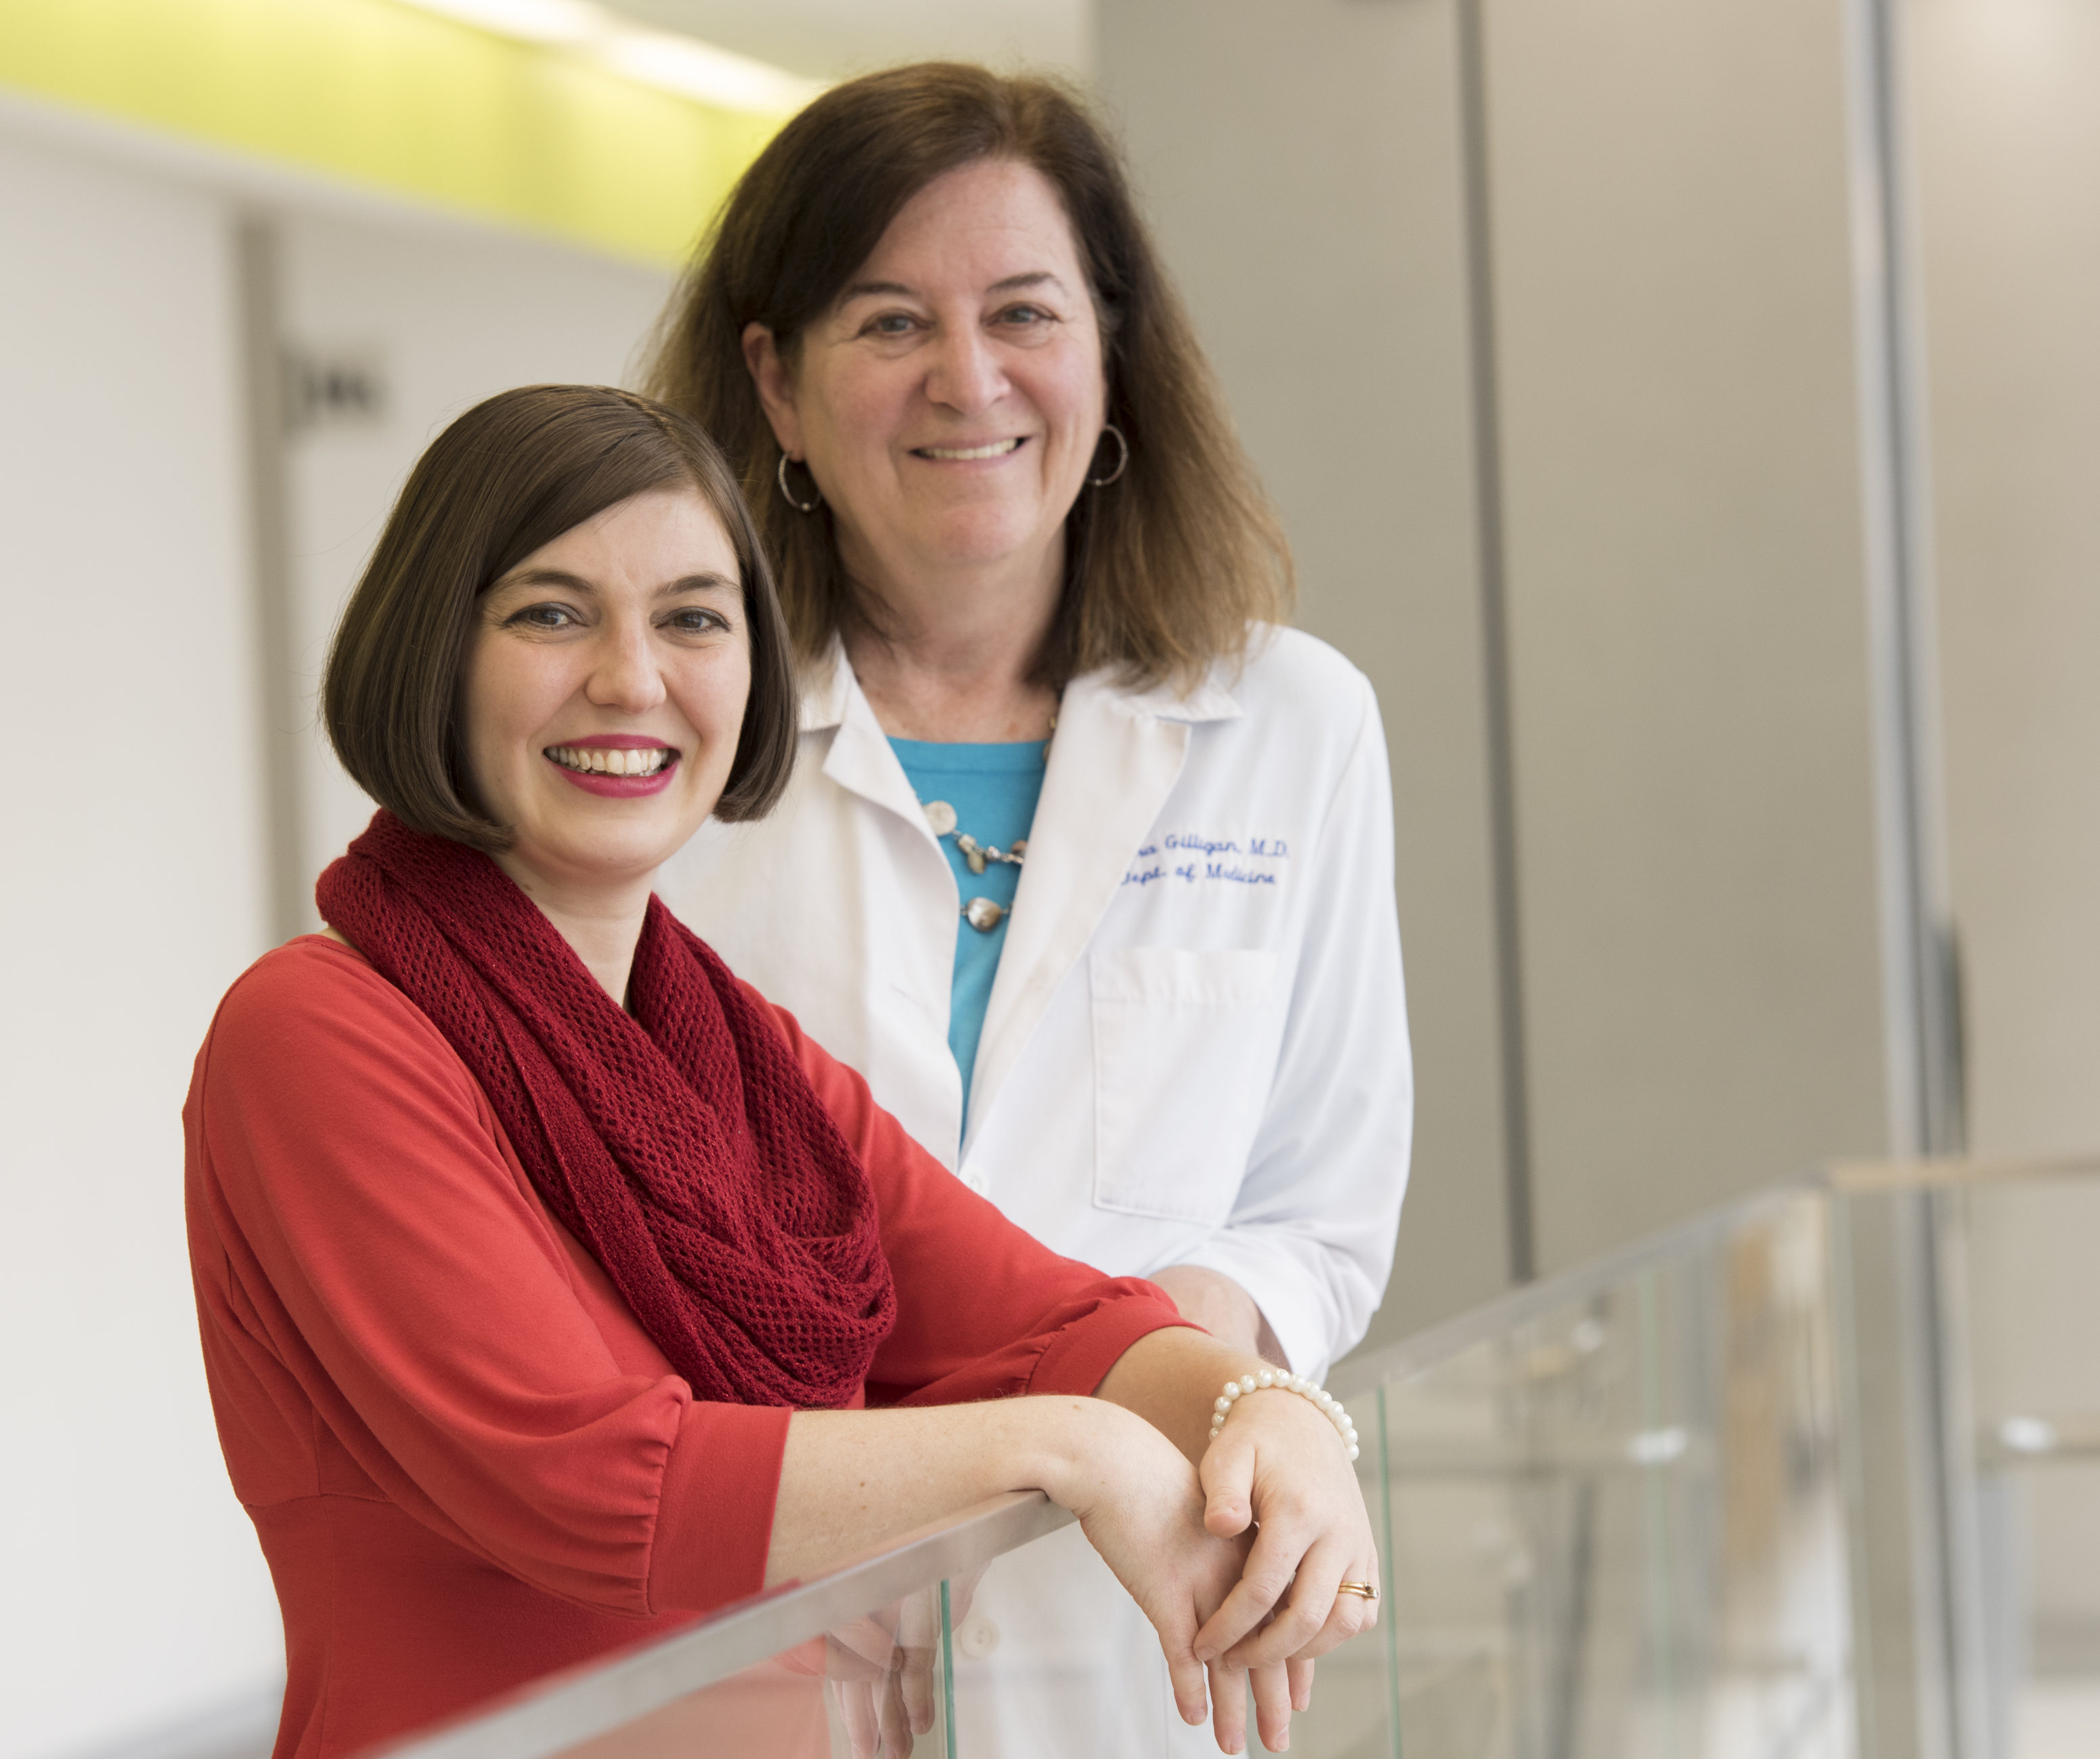 Andrea Scheibel, foreground, and her oncologist, Diana Gilligan, MD, PhD. (PHOTO BY SUSAN KAHN)